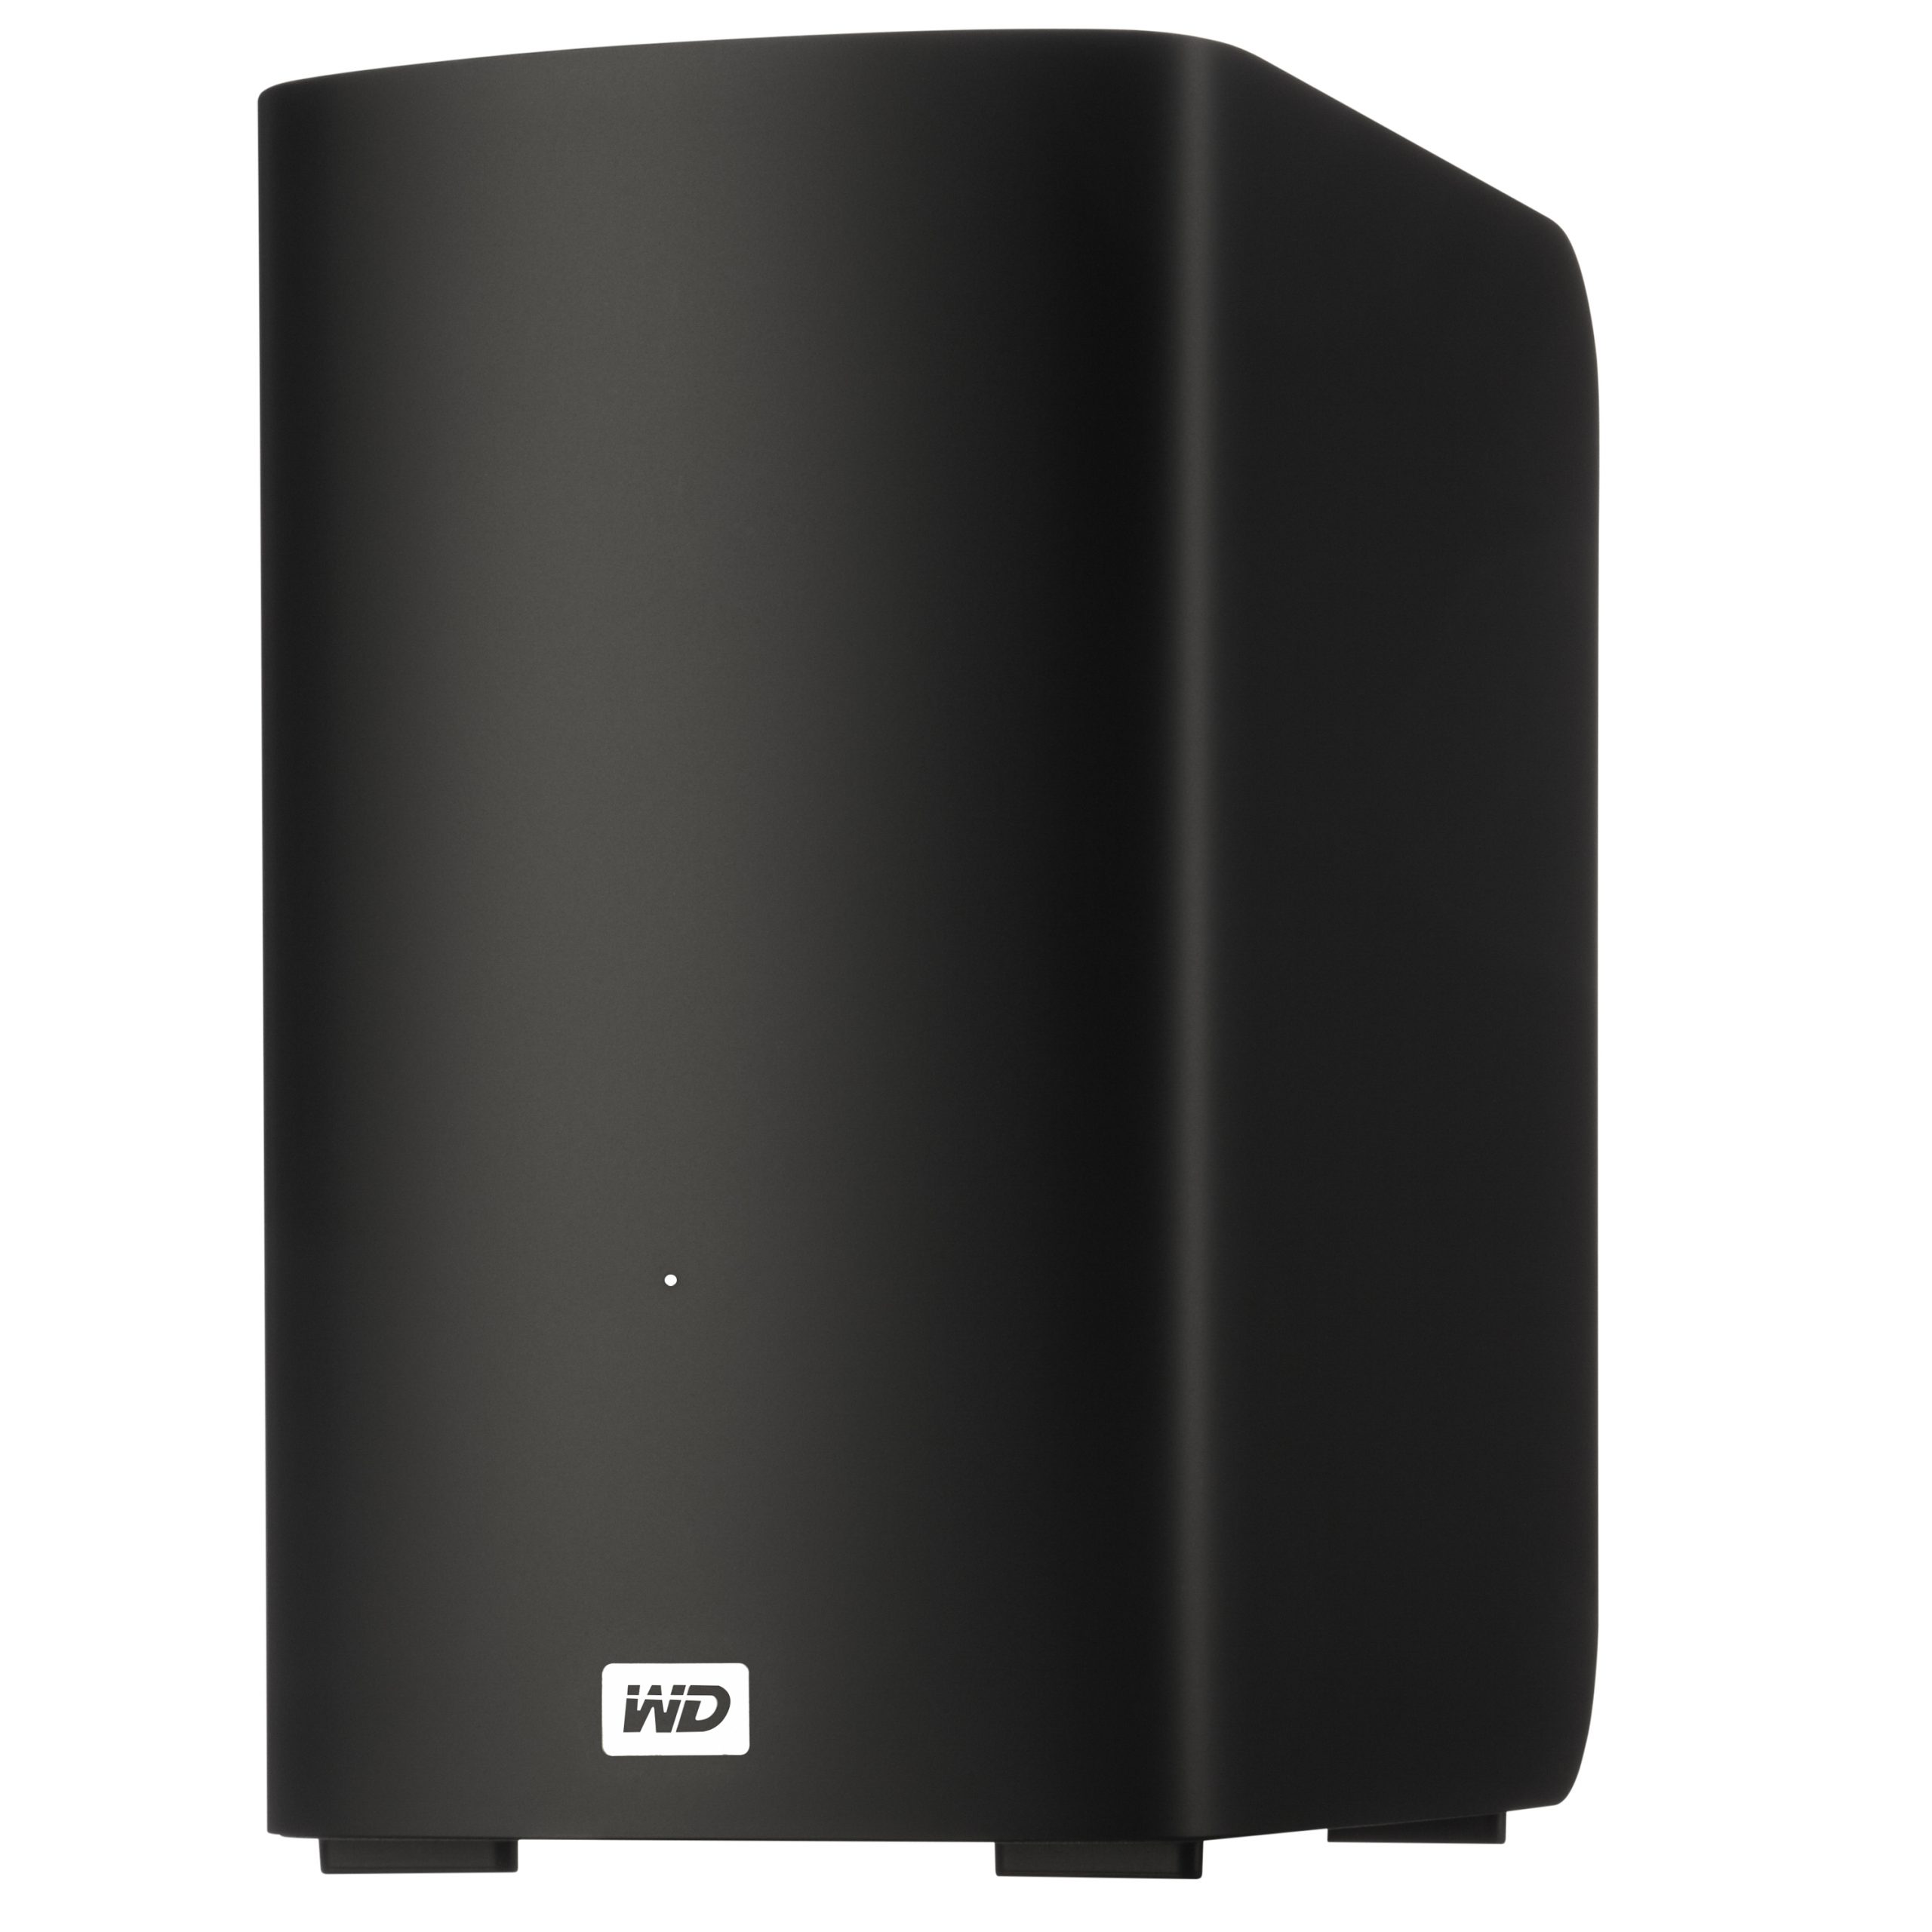 Western Digital Launches Fastest External HDD Ever